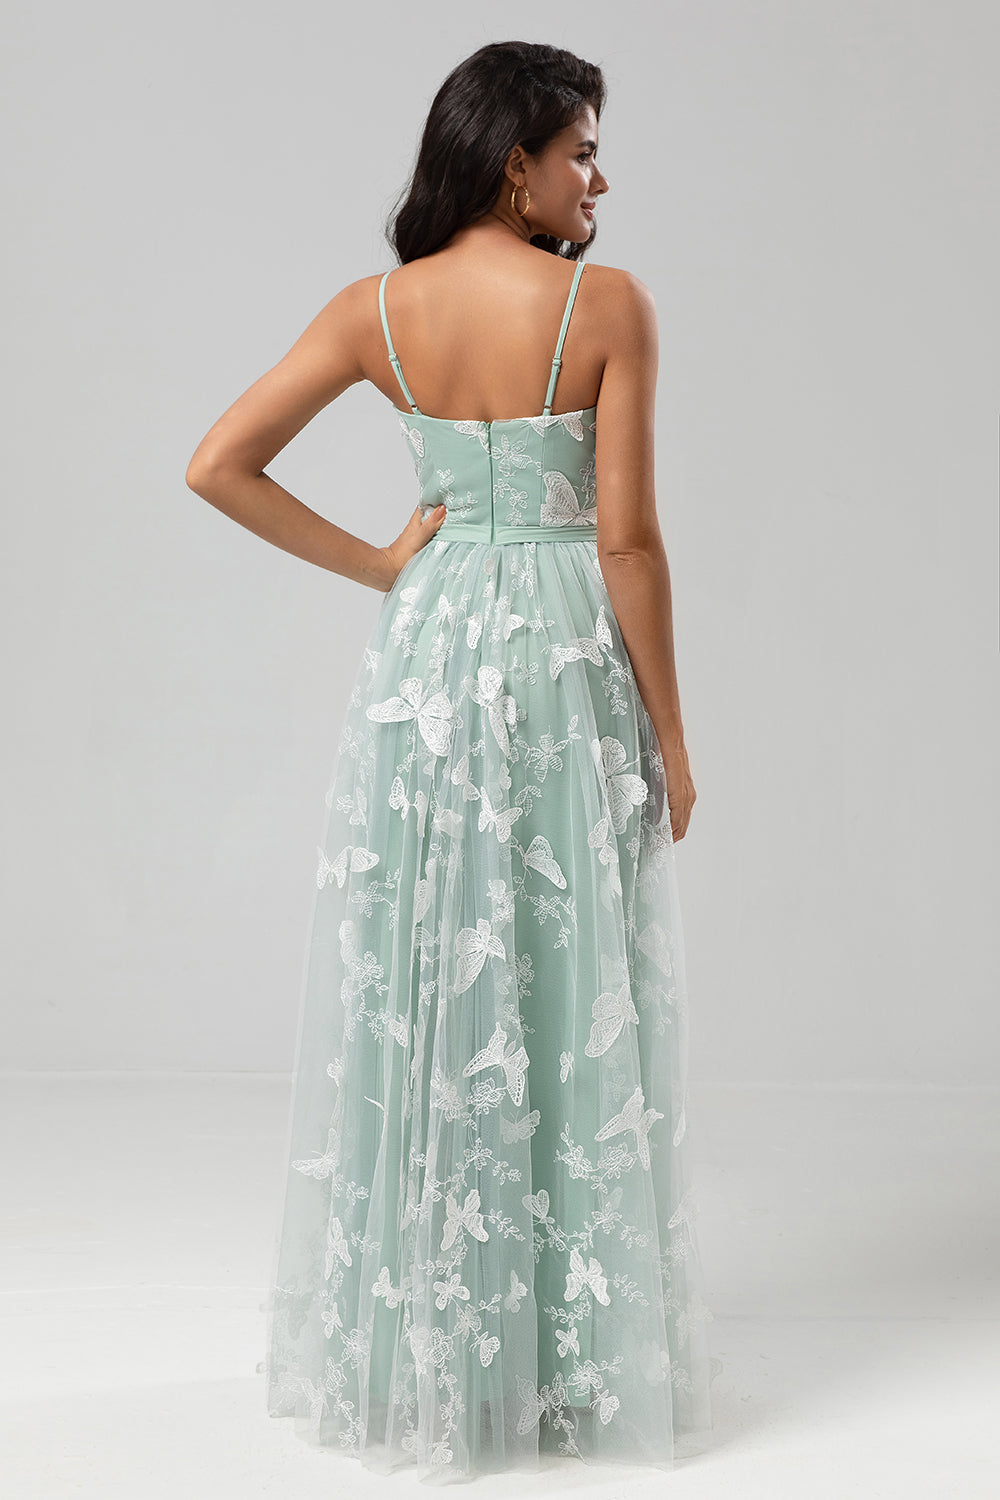 Captured Your Heart A Line Spaghetti Straps Matcha Long Bridesmaid Dress with Appliques